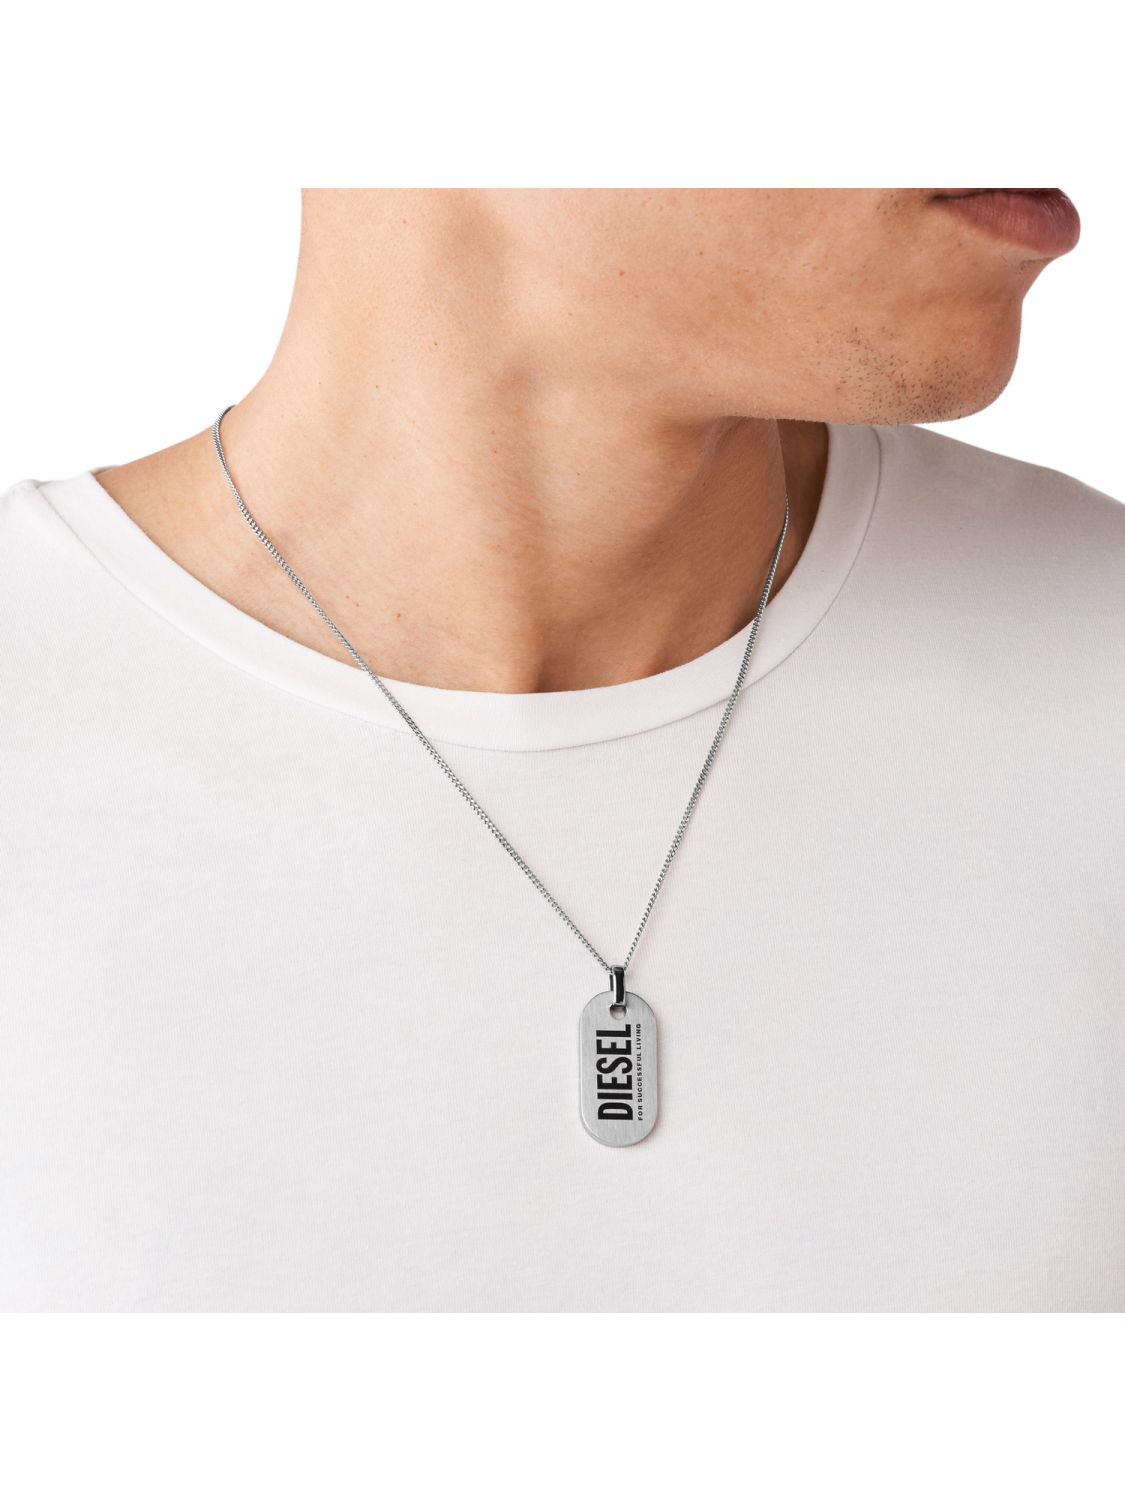 • Tag Dog Diesel Men\'s DX1348040 Necklace uhrcenter Chain Pendant with Curb